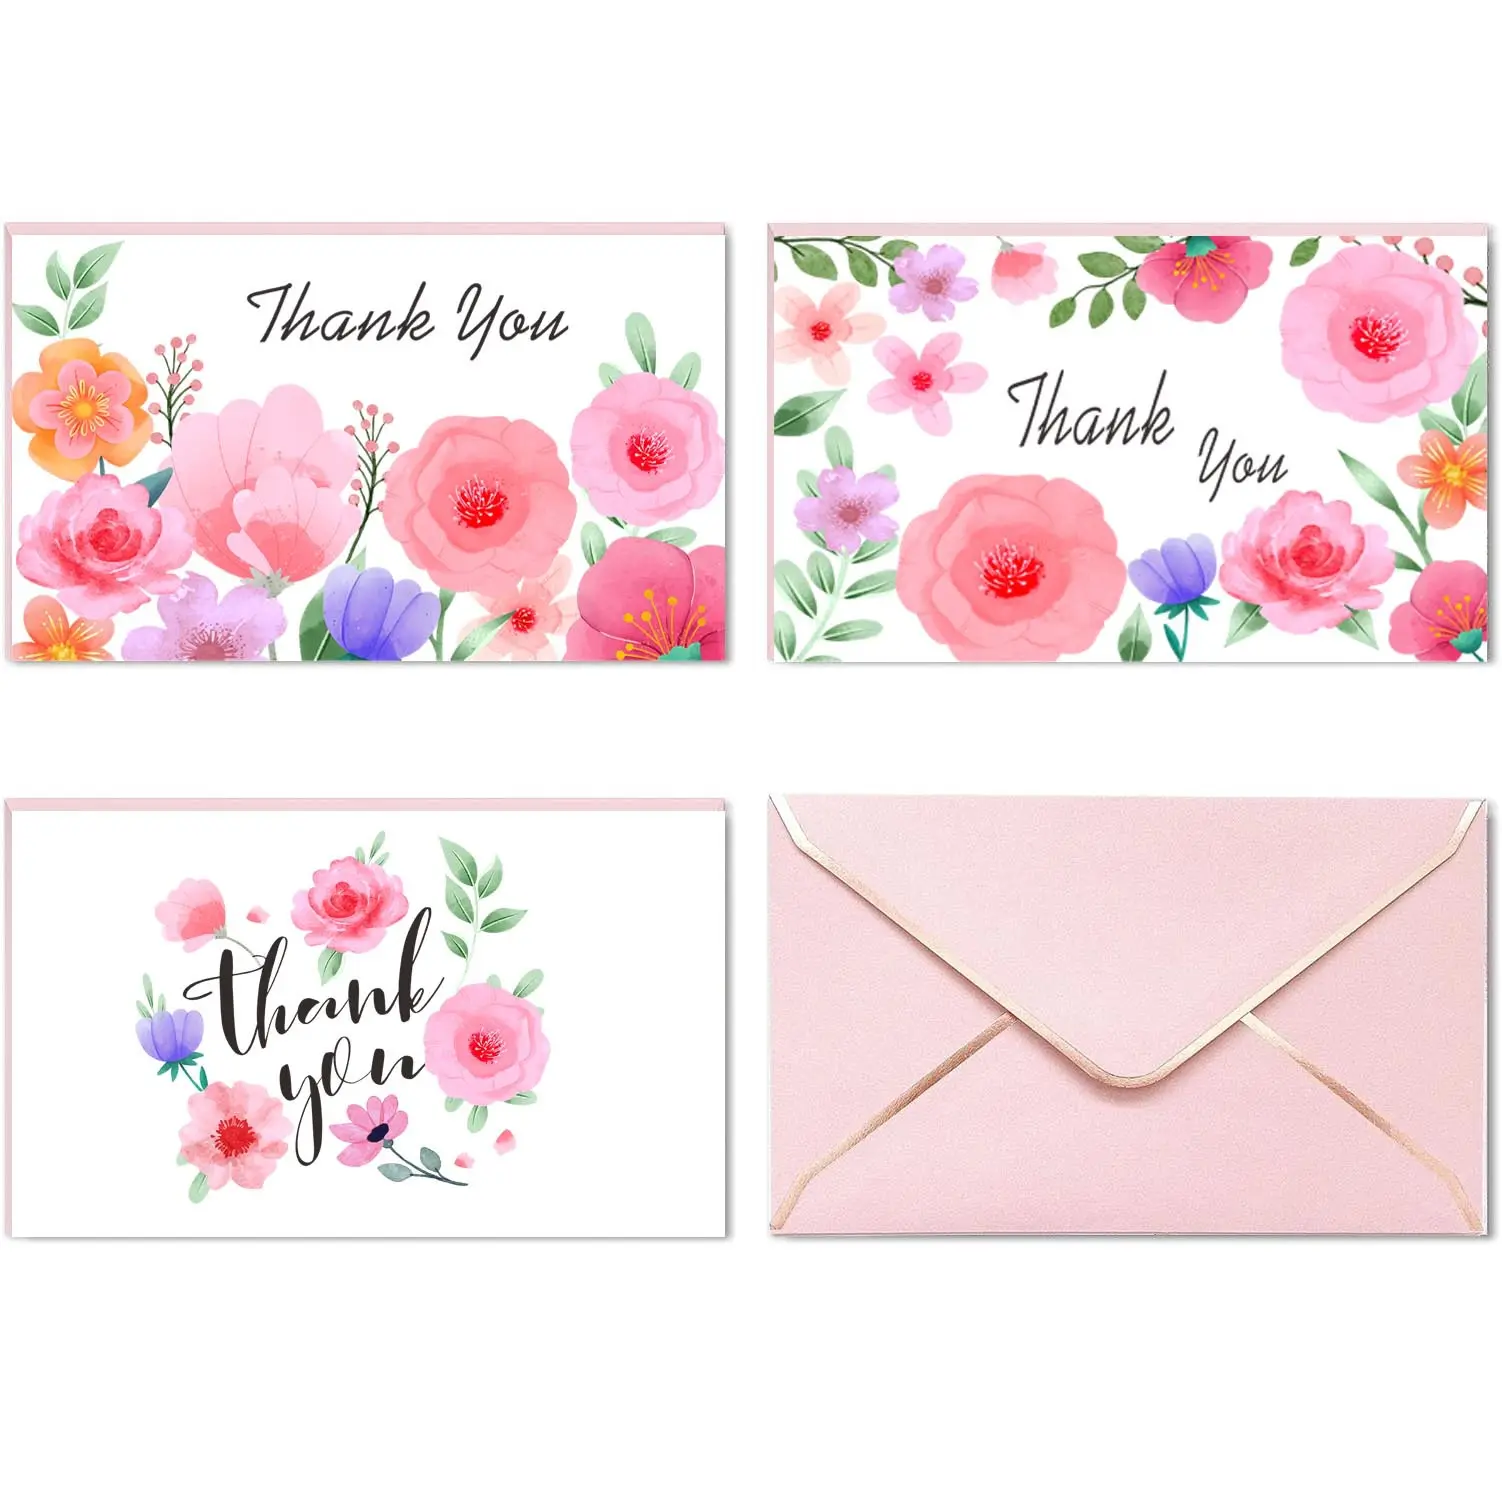 2023 New design custom debossed colorful printing and stamping luxury thank you cards with envelopes for small business